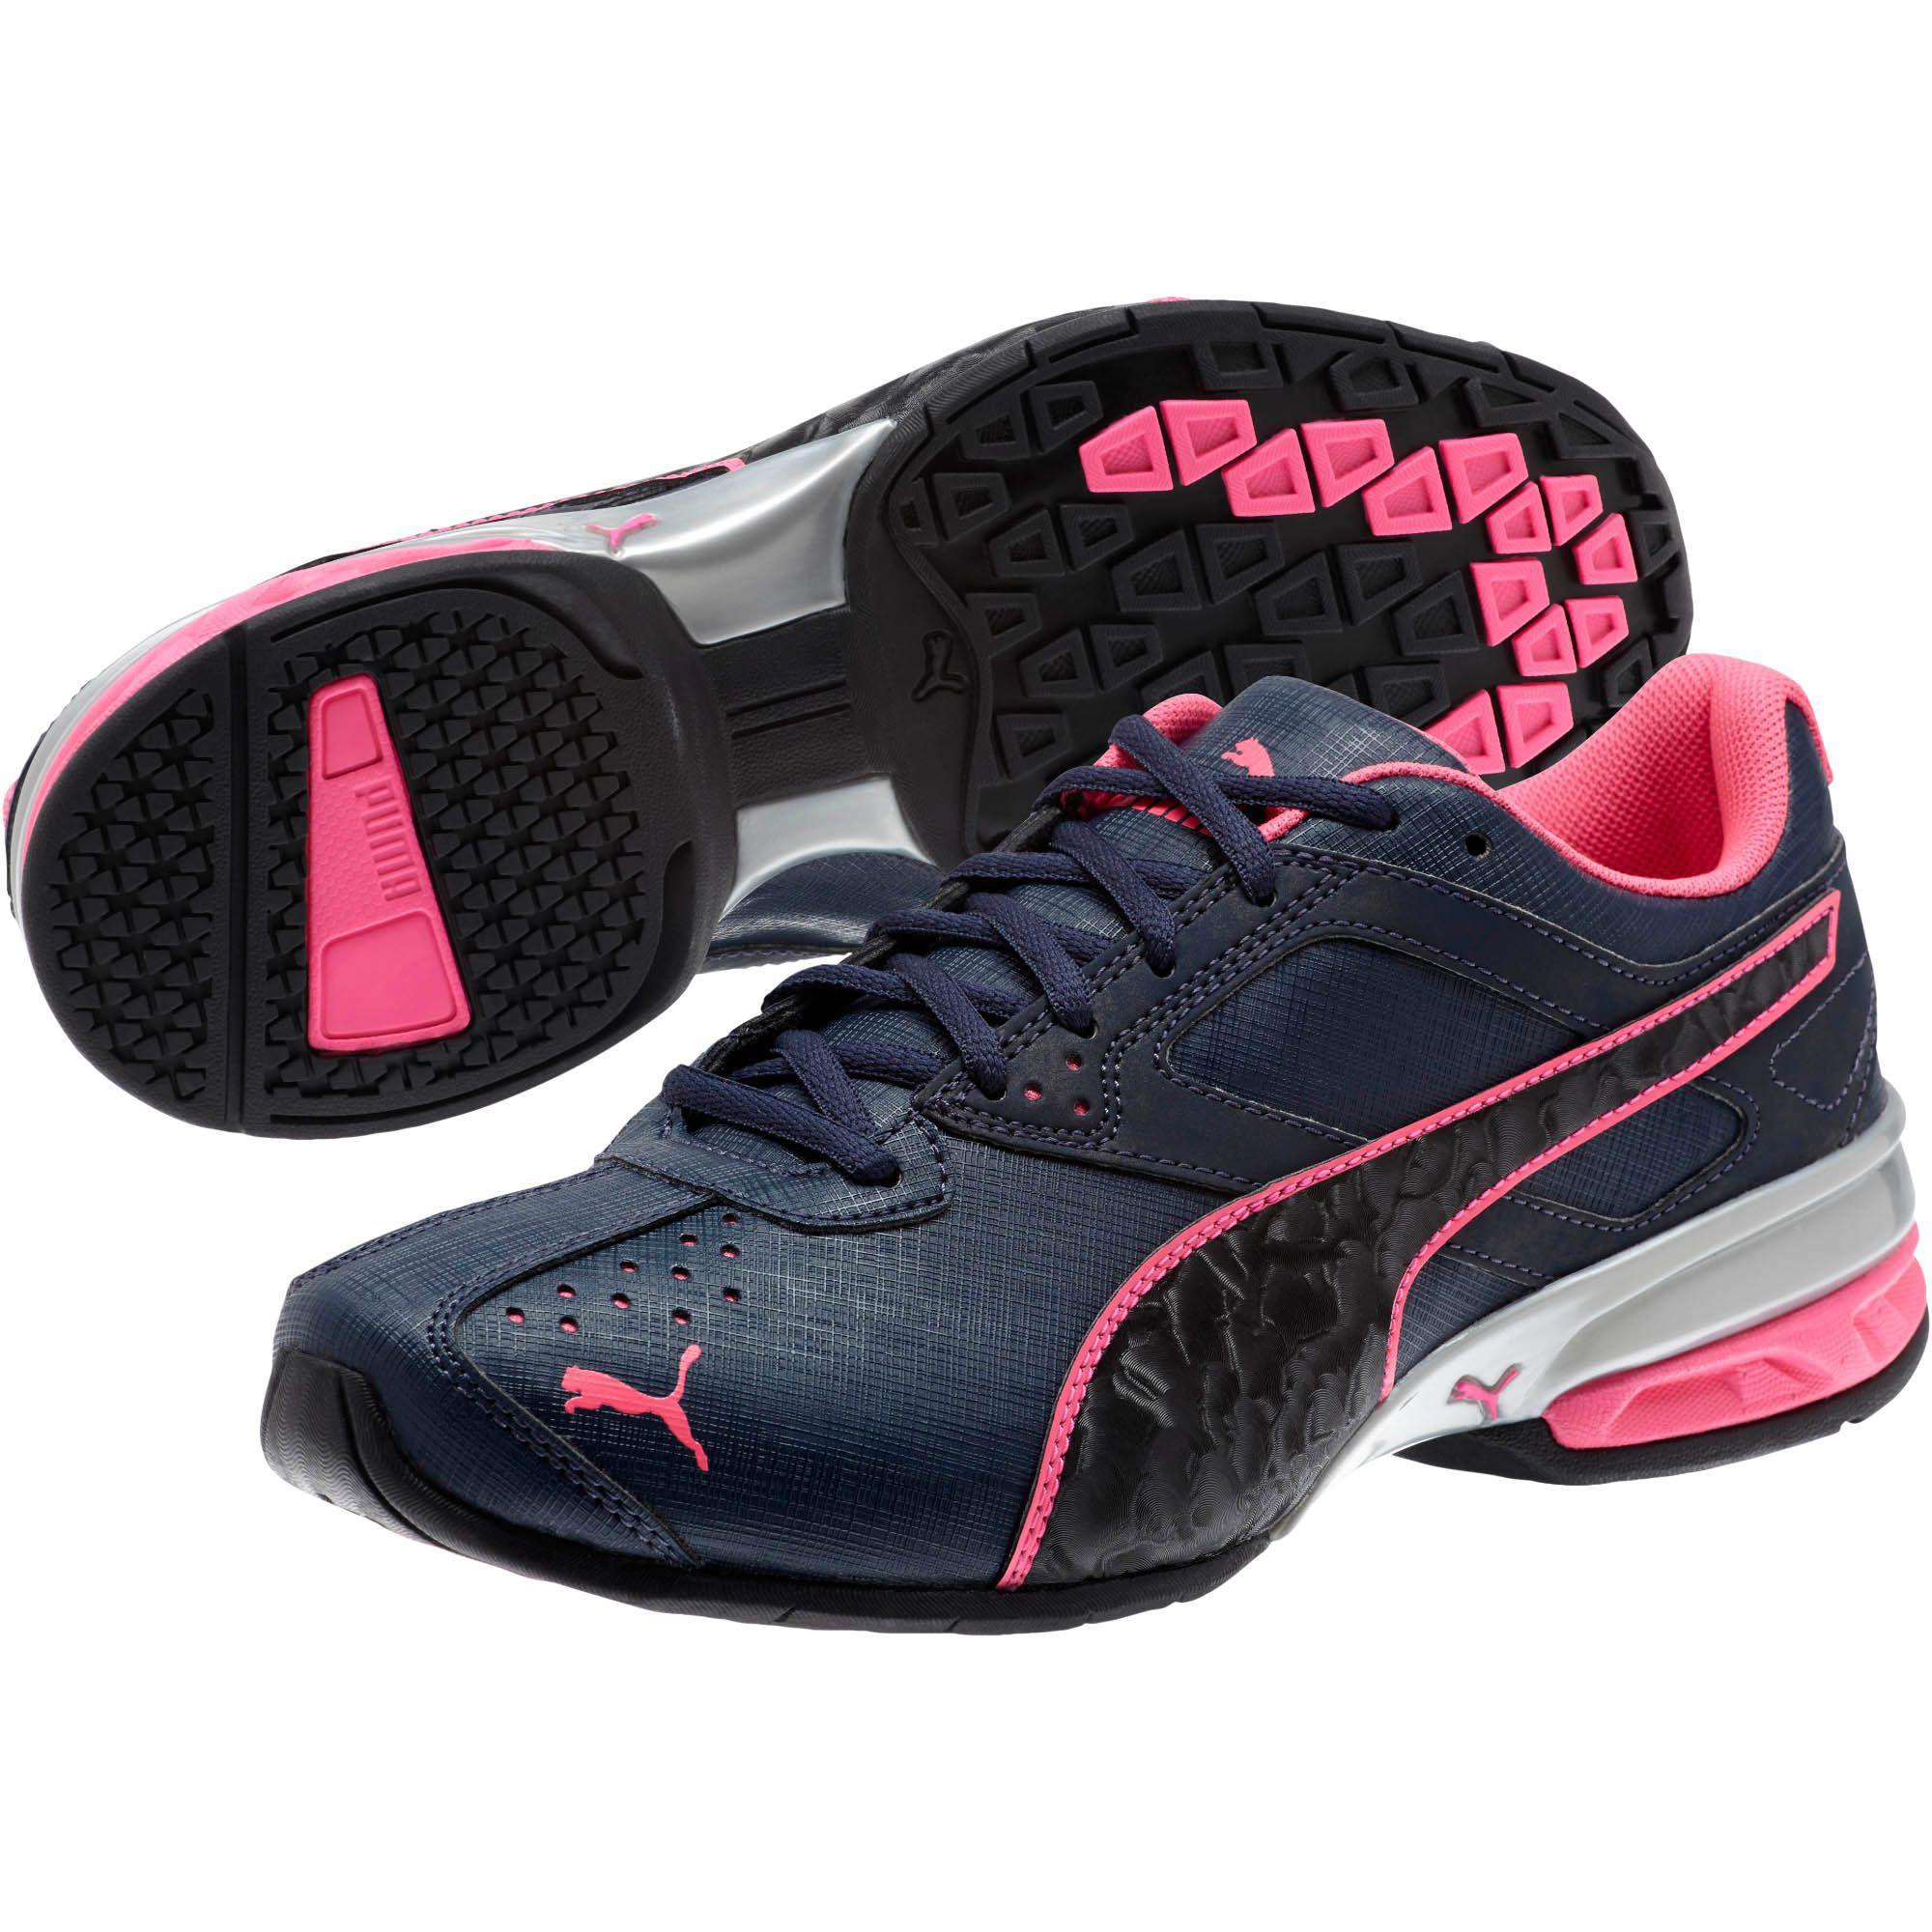 PUMA Synthetic Tazon 6 Accent Women's Running Shoes in ...